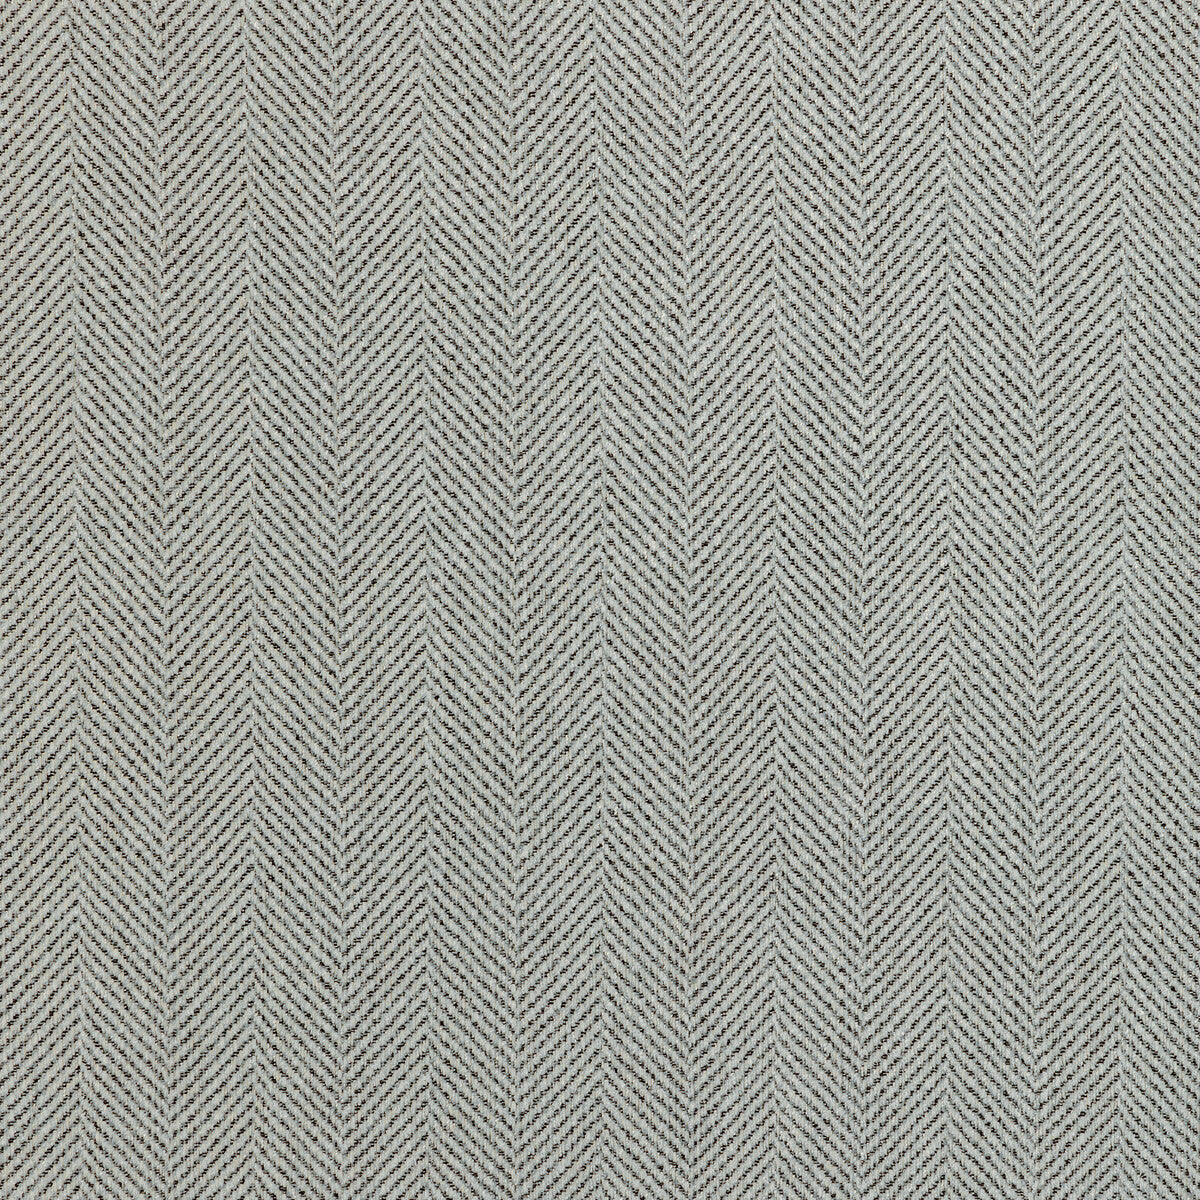 Healing Touch fabric in gray matters color - pattern 36389.1121.0 - by Kravet Design in the Crypton Home - Celliant collection